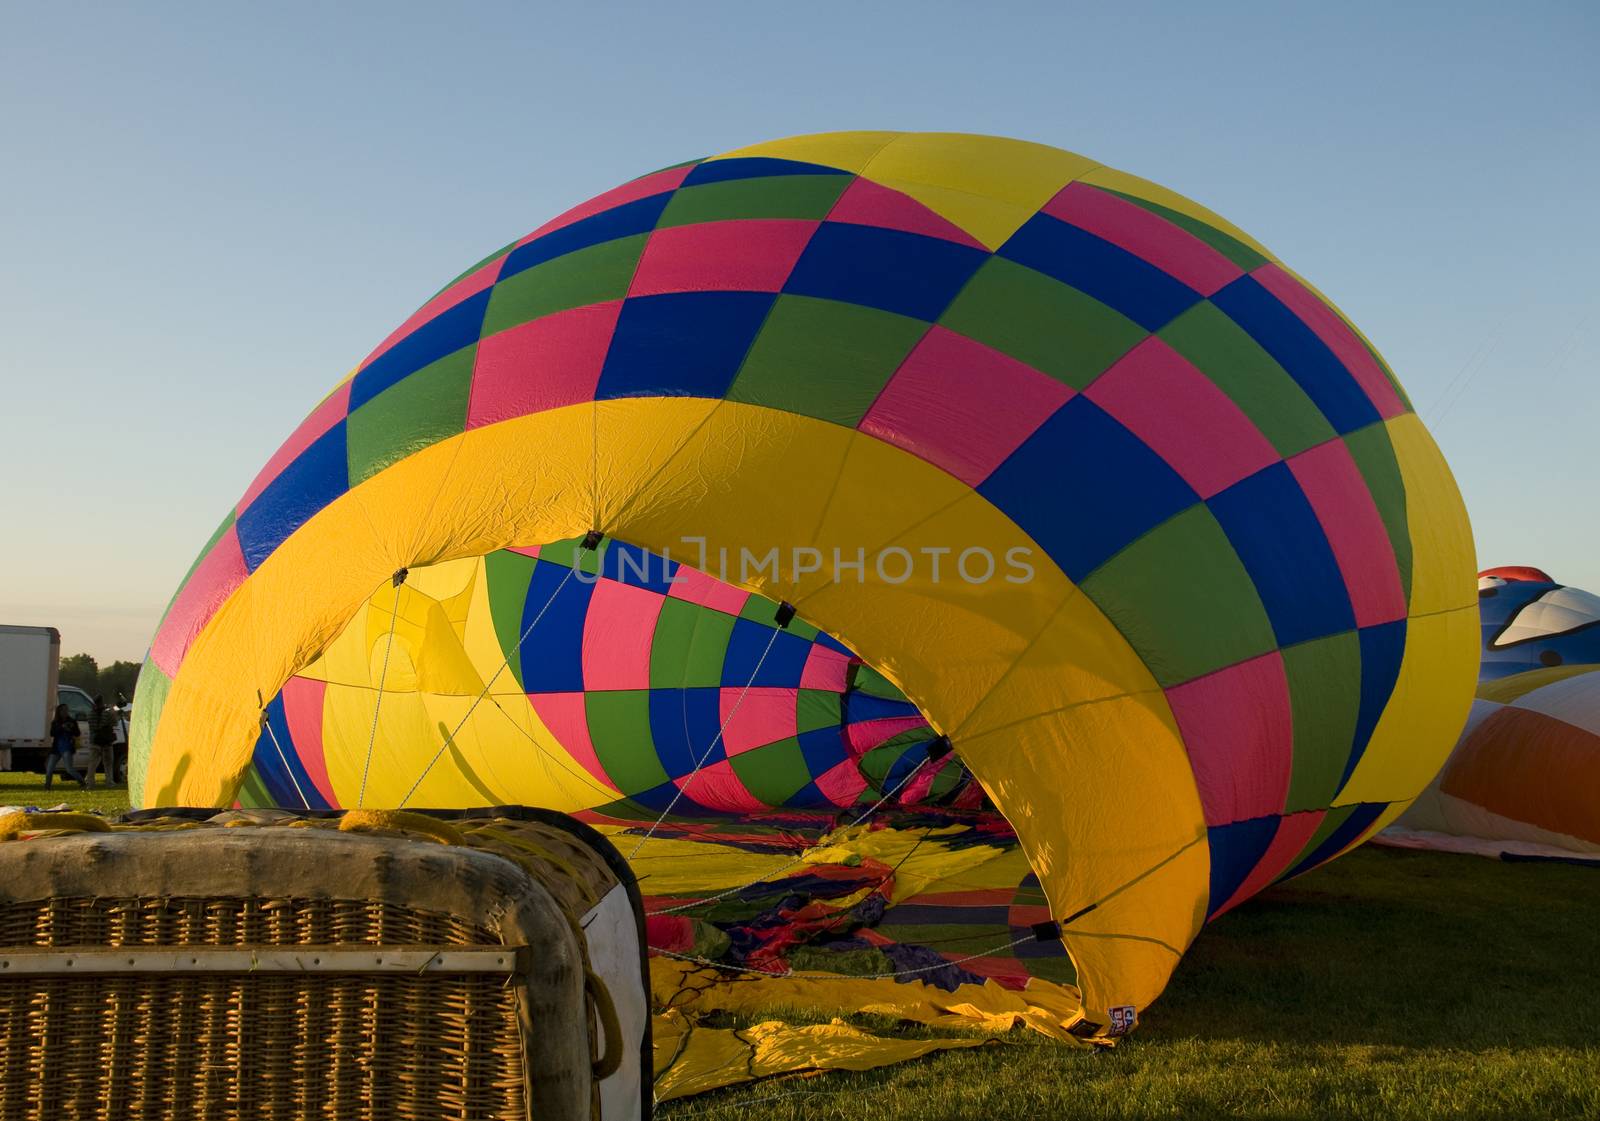 The colorful envelope of a hot-air balloon being inflated on the ground.